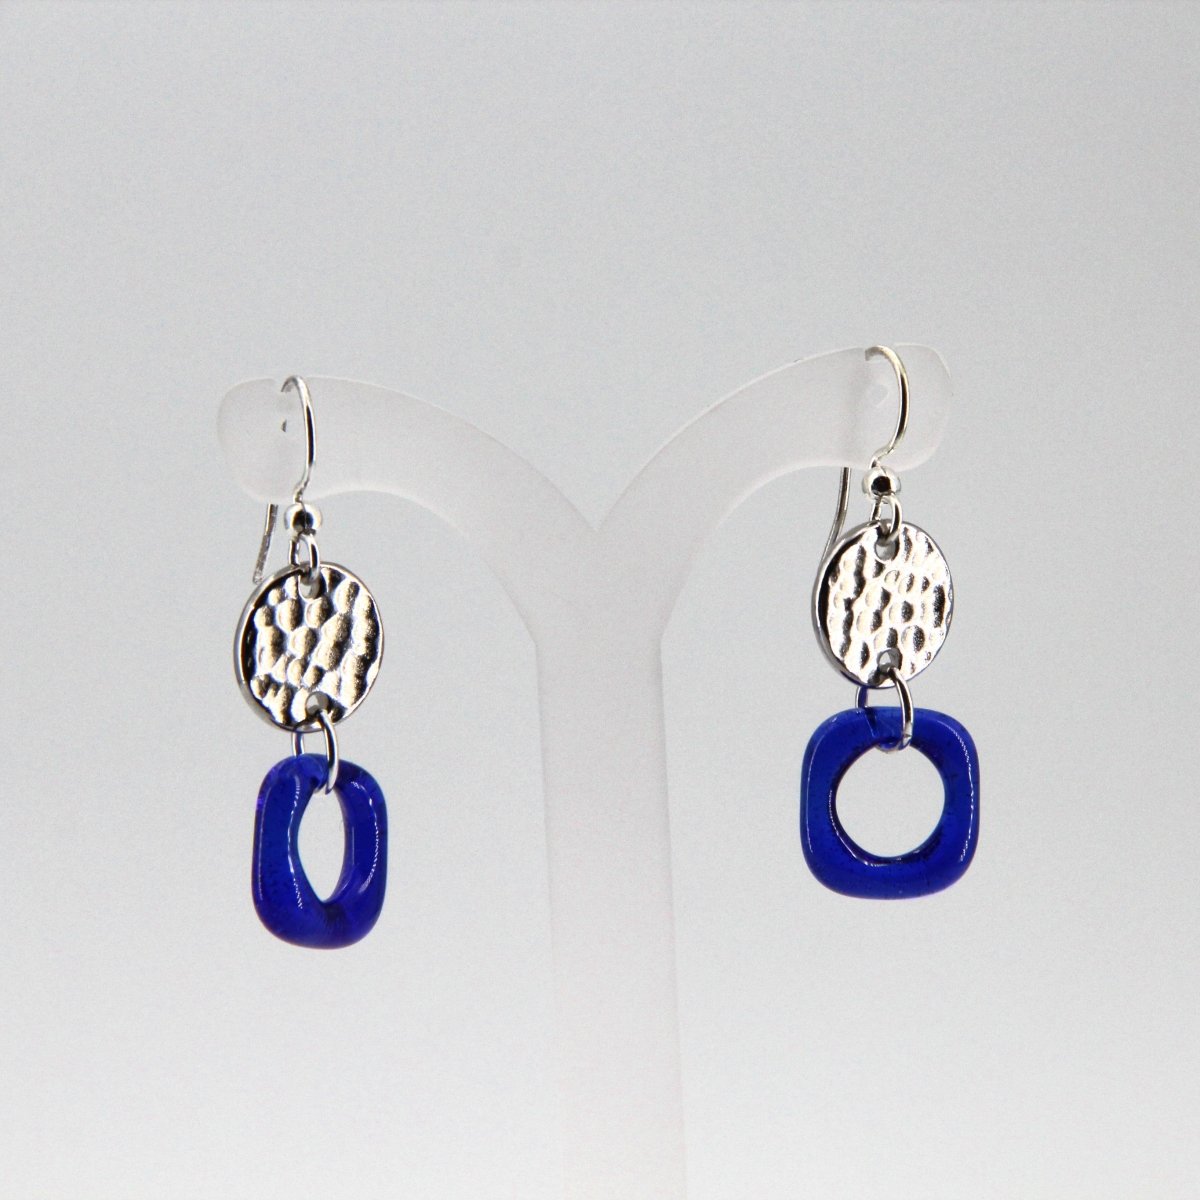 Blue Glass Earrings with Round Silver Charm